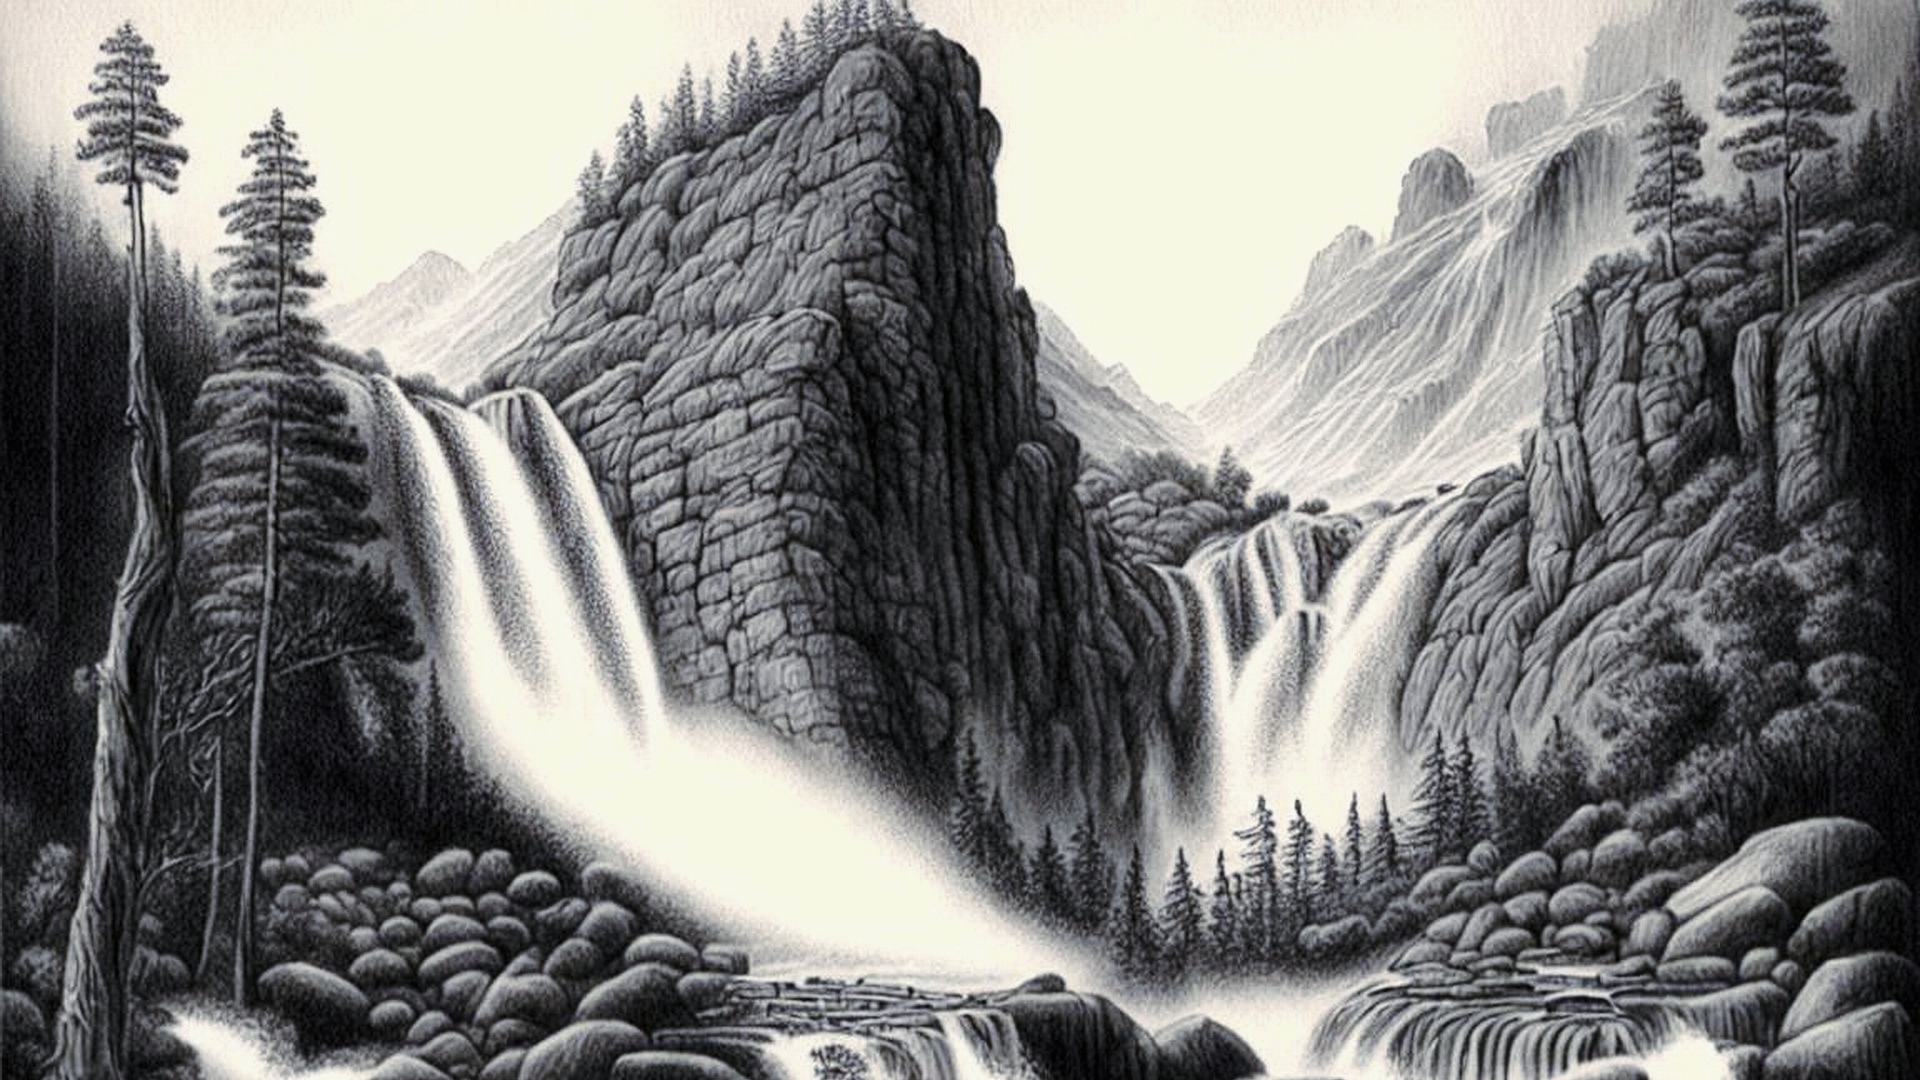 Drawing of a waterfall on the background of a mountain landscape